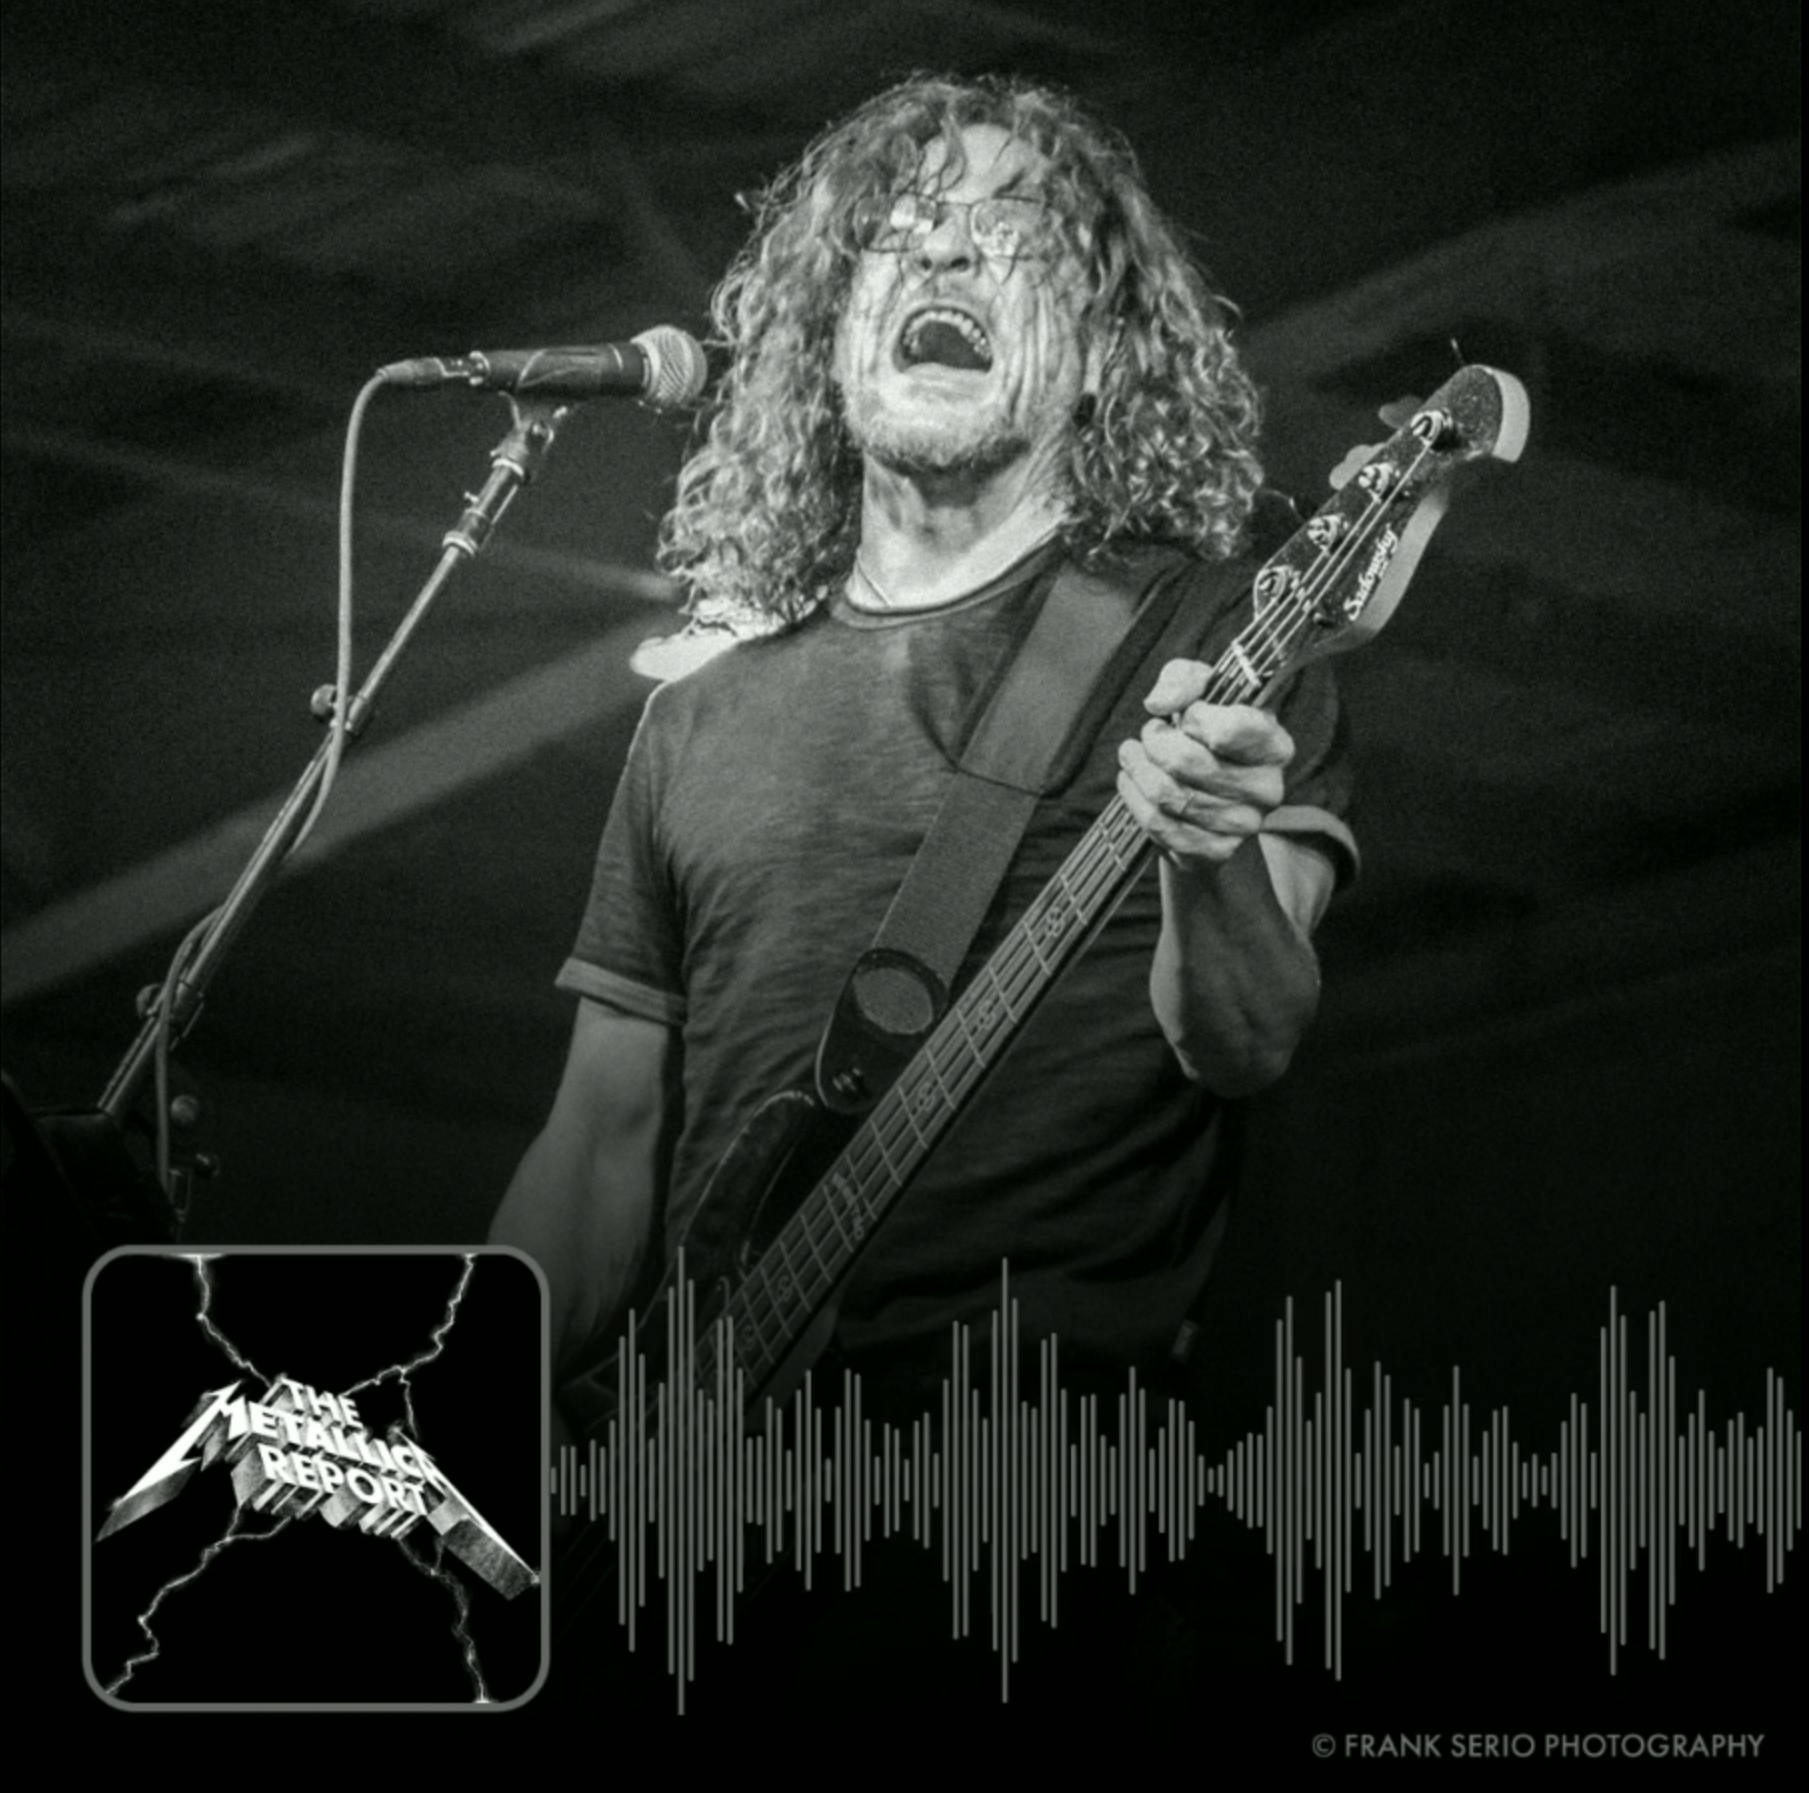 Episode 24: Catching up with Jason Newsted